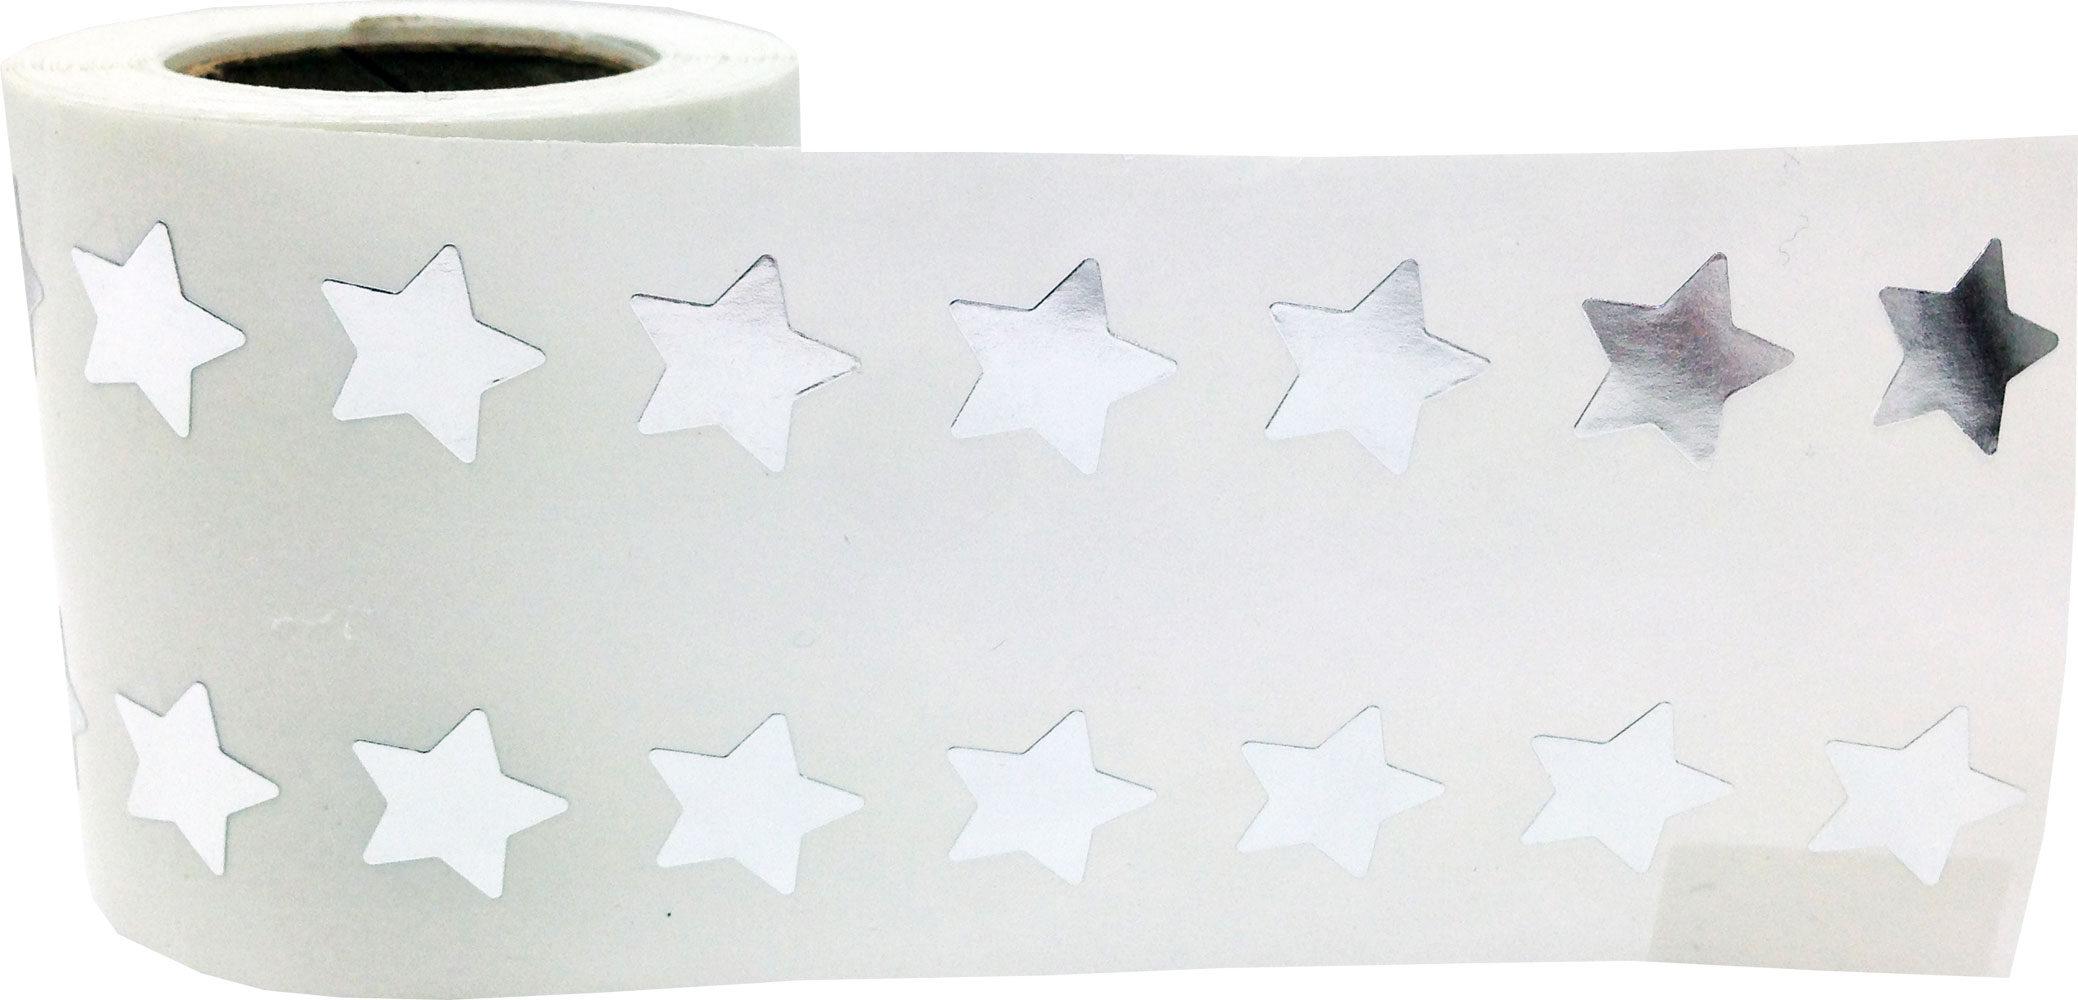 Metallic Silver Star Stickers, 1/2 Inch Wide, 1000 Labels on a Roll 